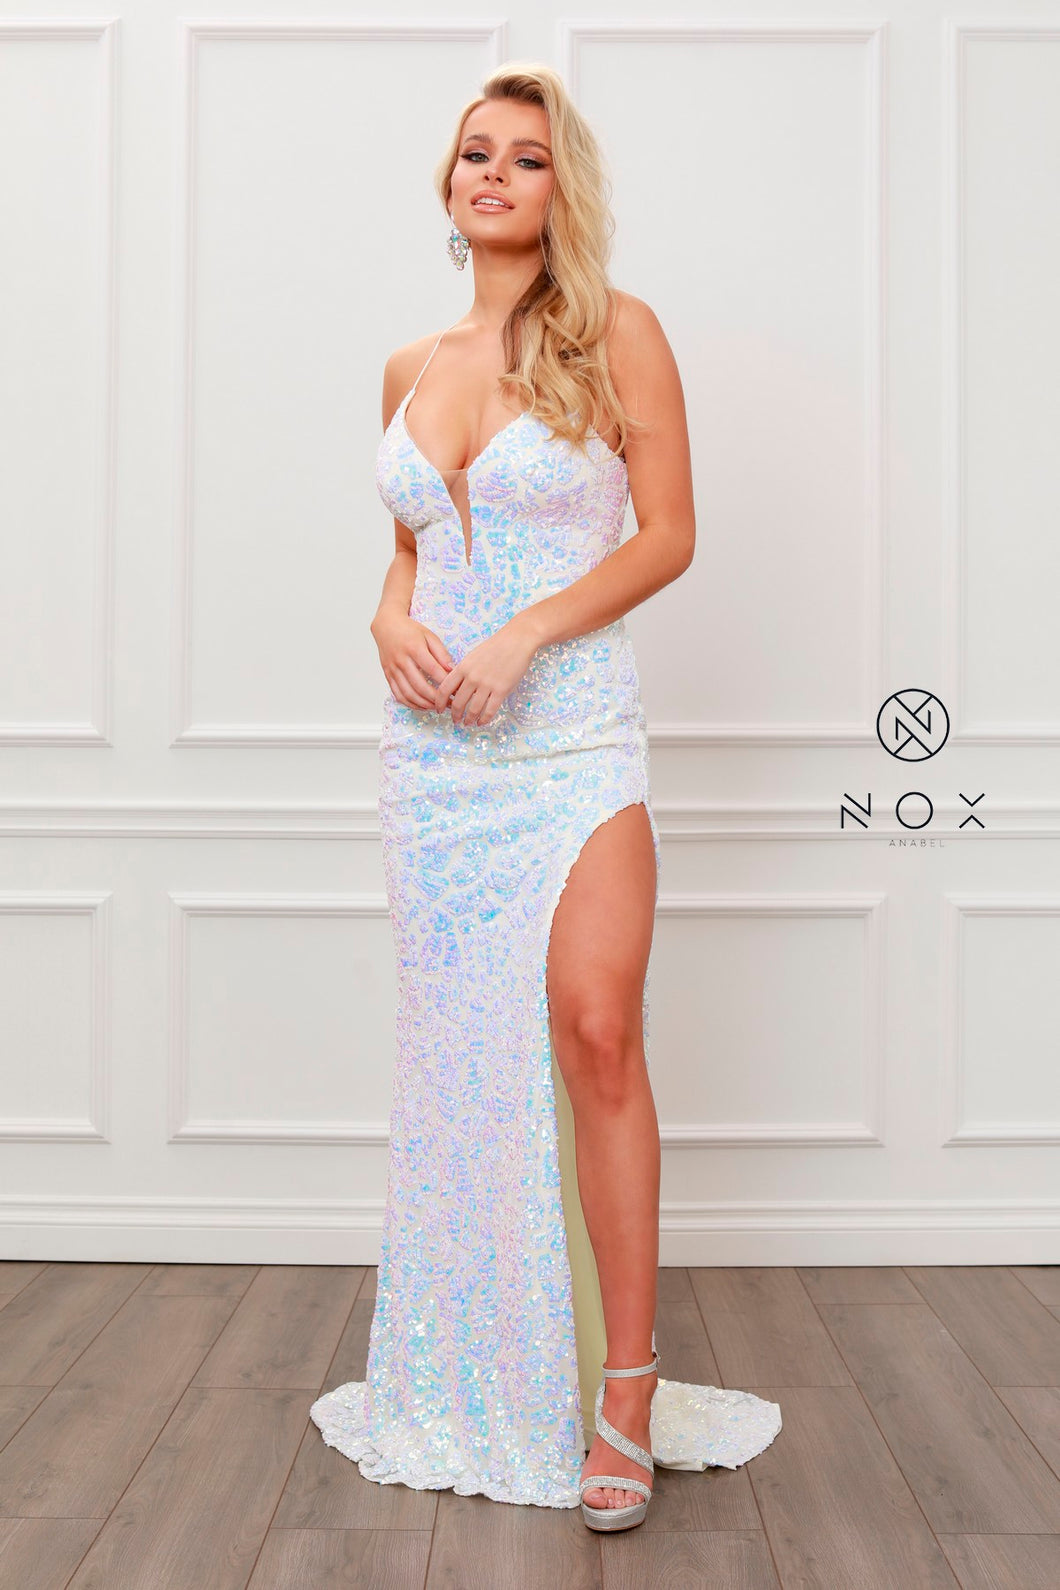 N S458 - Iridescent Sequin Fit & Flare Prom Gown with Plunging V-Neck Open Lace Up Corset Back & High Leg Slit Prom Dress Nox 2 WHITE 